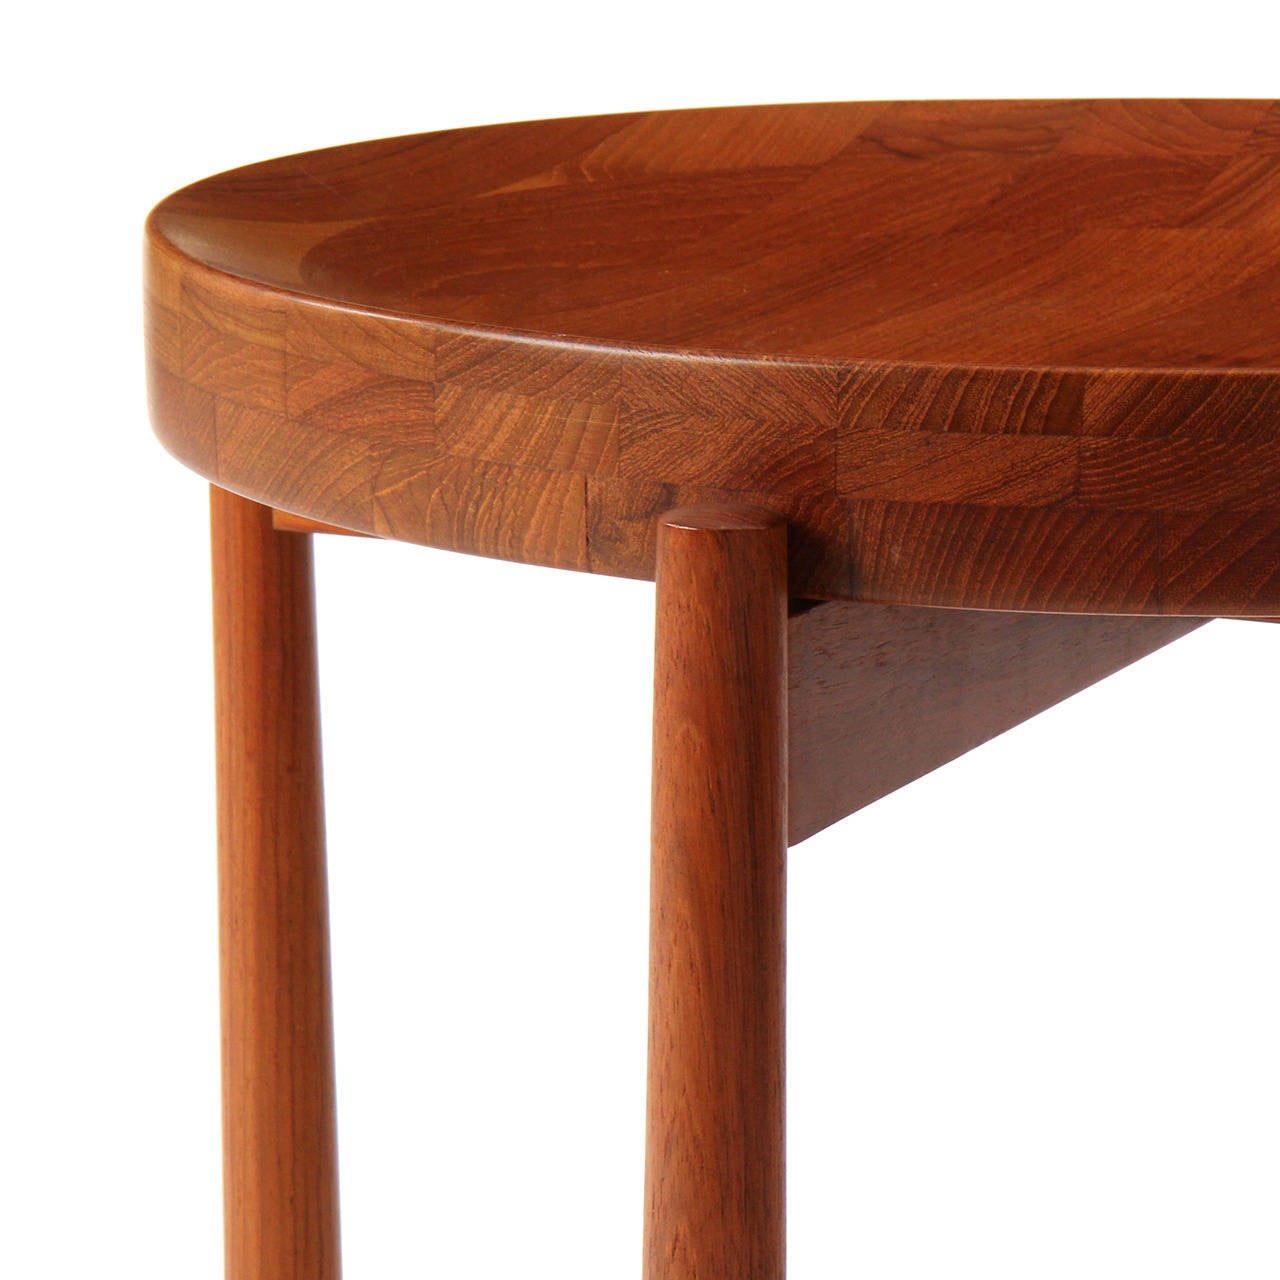 1960s Danish Modern Tray Table by Jens Quistgaard for Richard Nissen For Sale 3